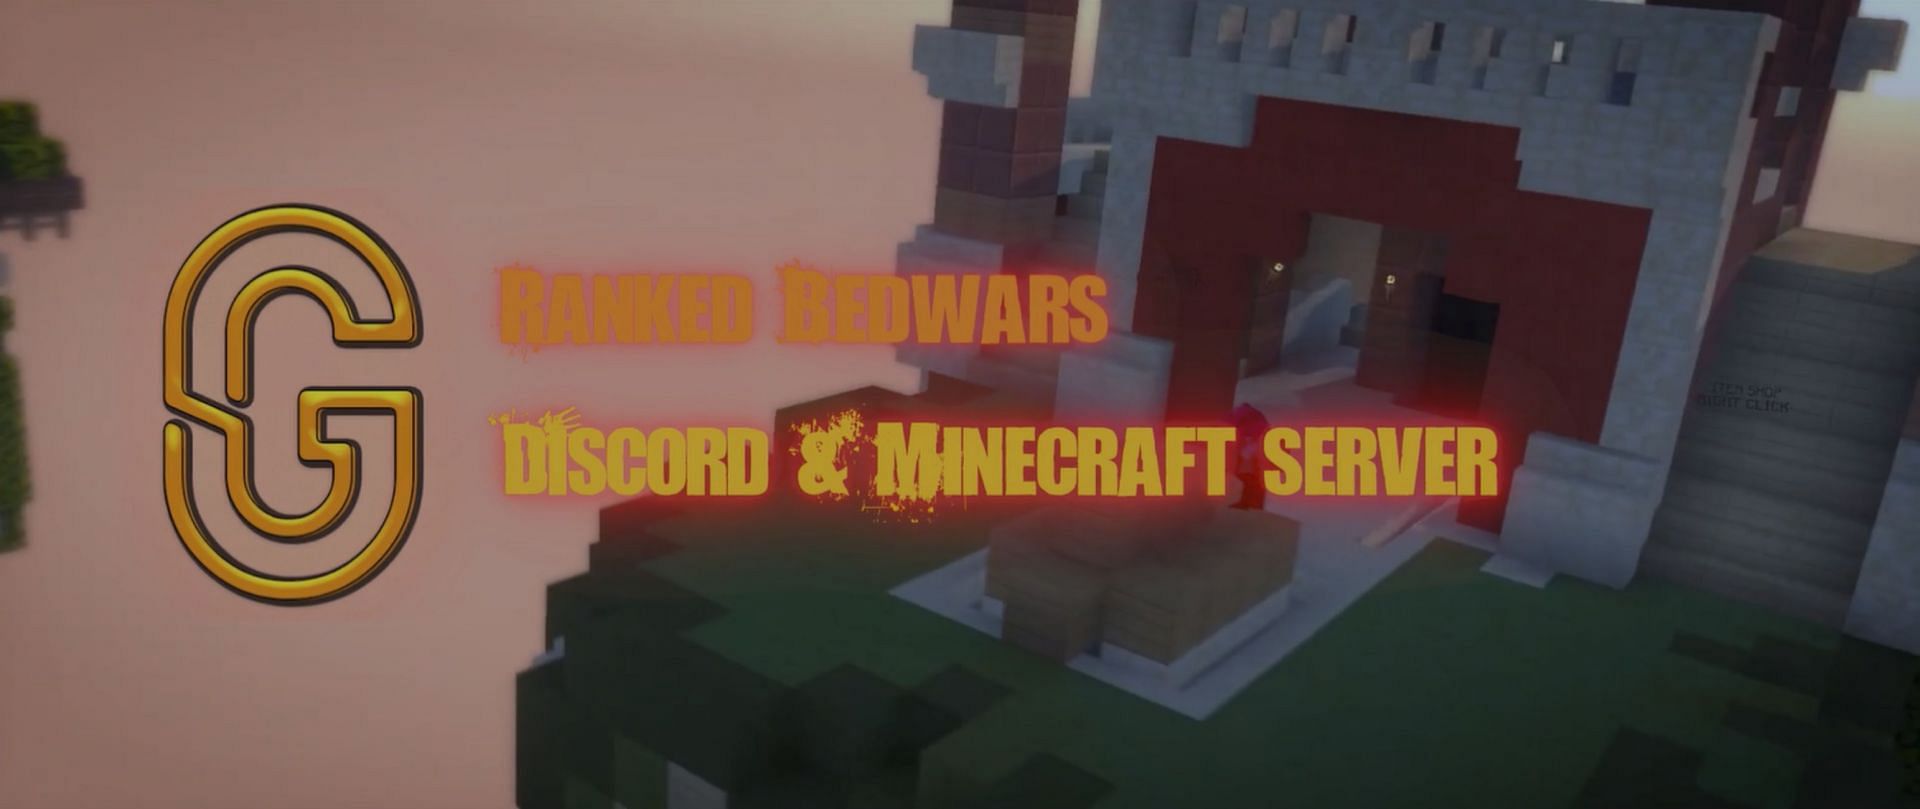 Glory Network prides itself on its Bedwars PvP (Image via Glory Network)